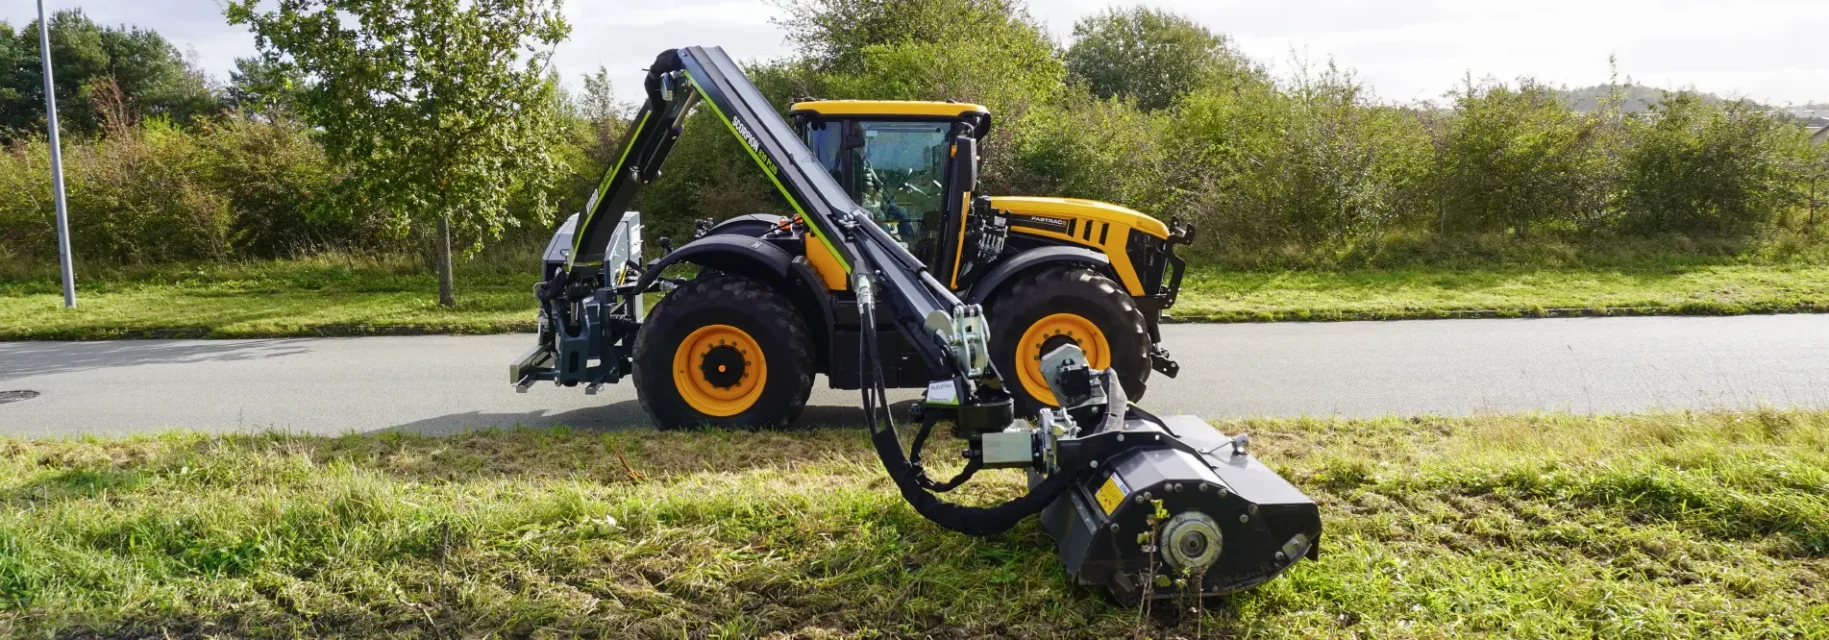 Slope mower mounted on tractor